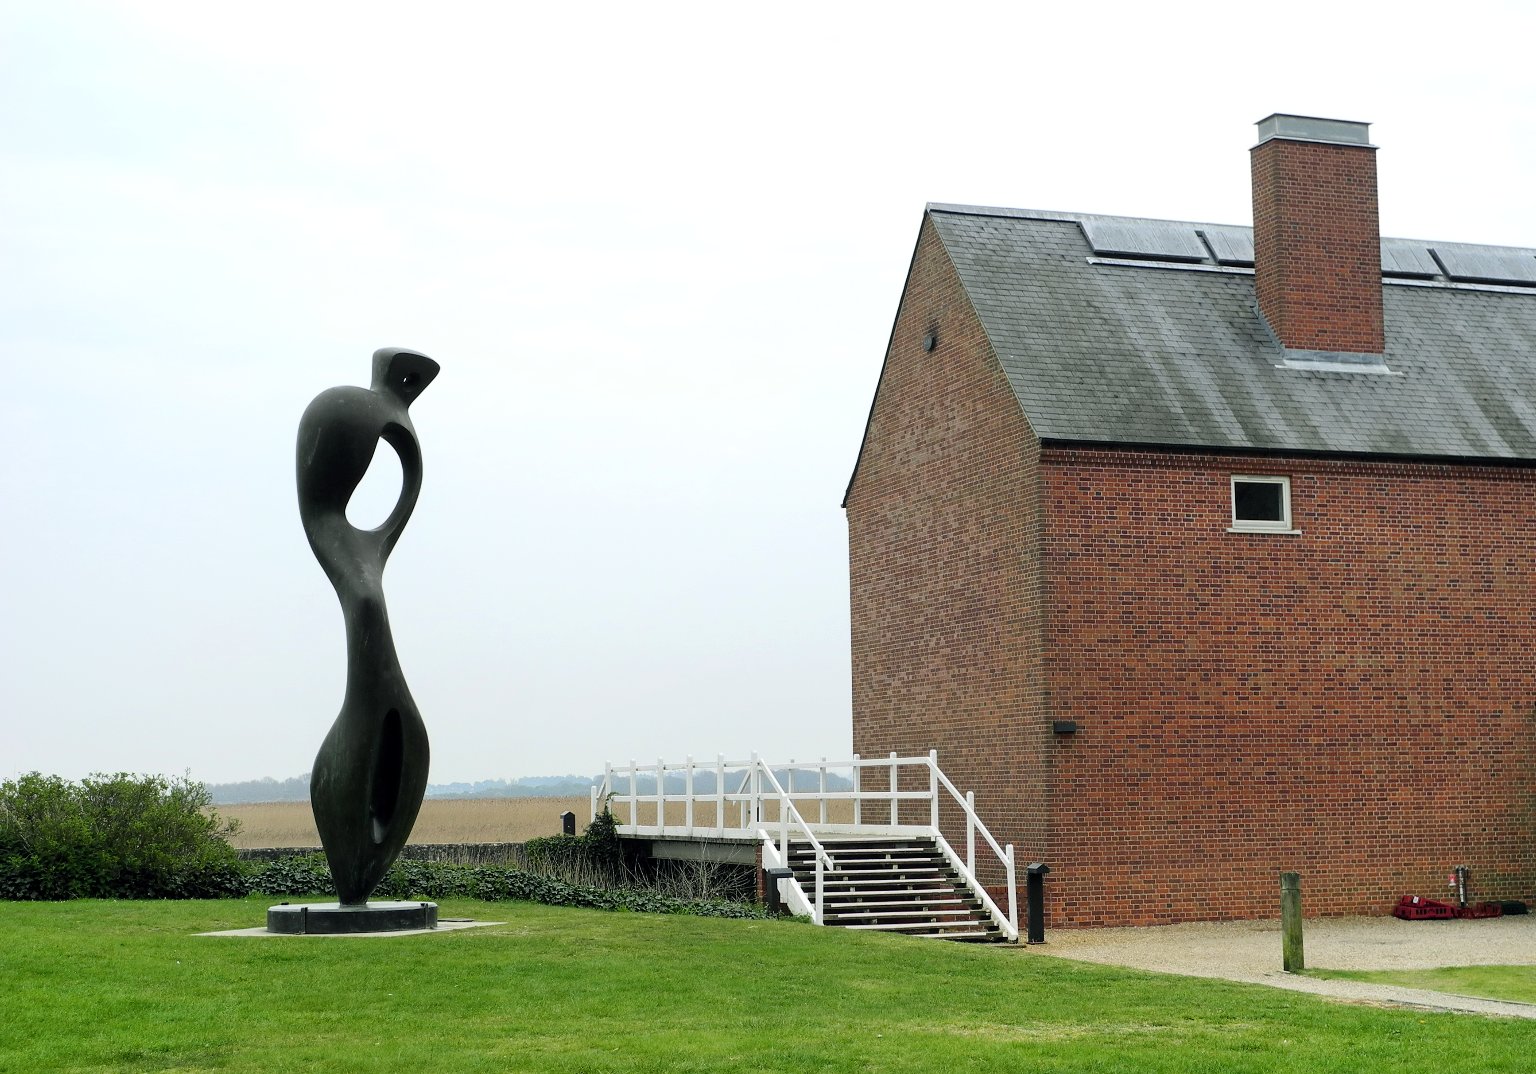 Snape Maltings Concert Hall and Large Interior Form